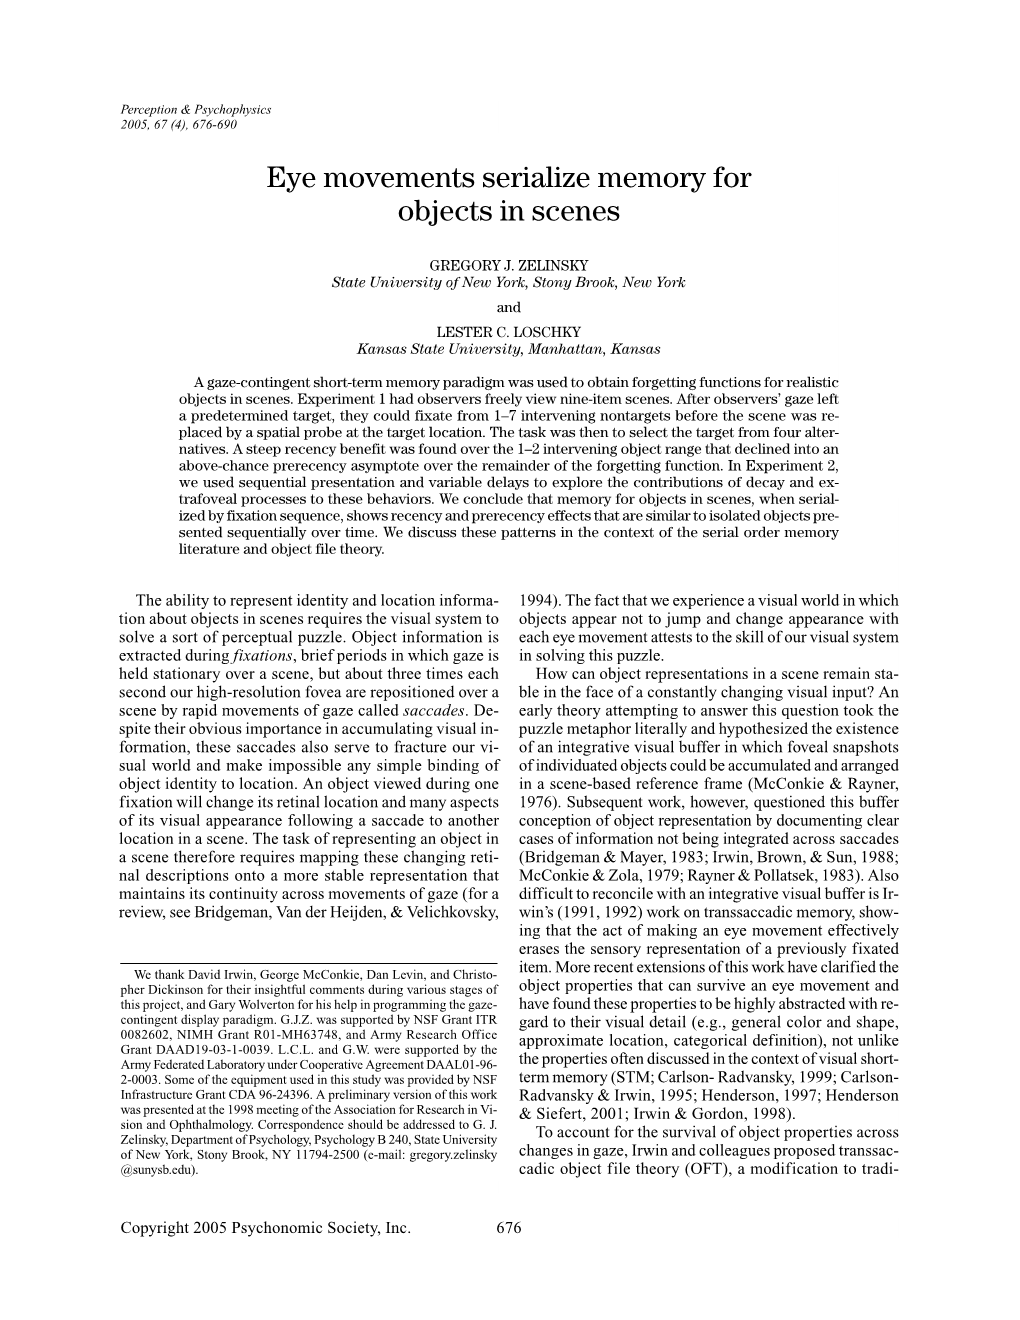 Eye Movements Serialize Memory for Objects in Scenes